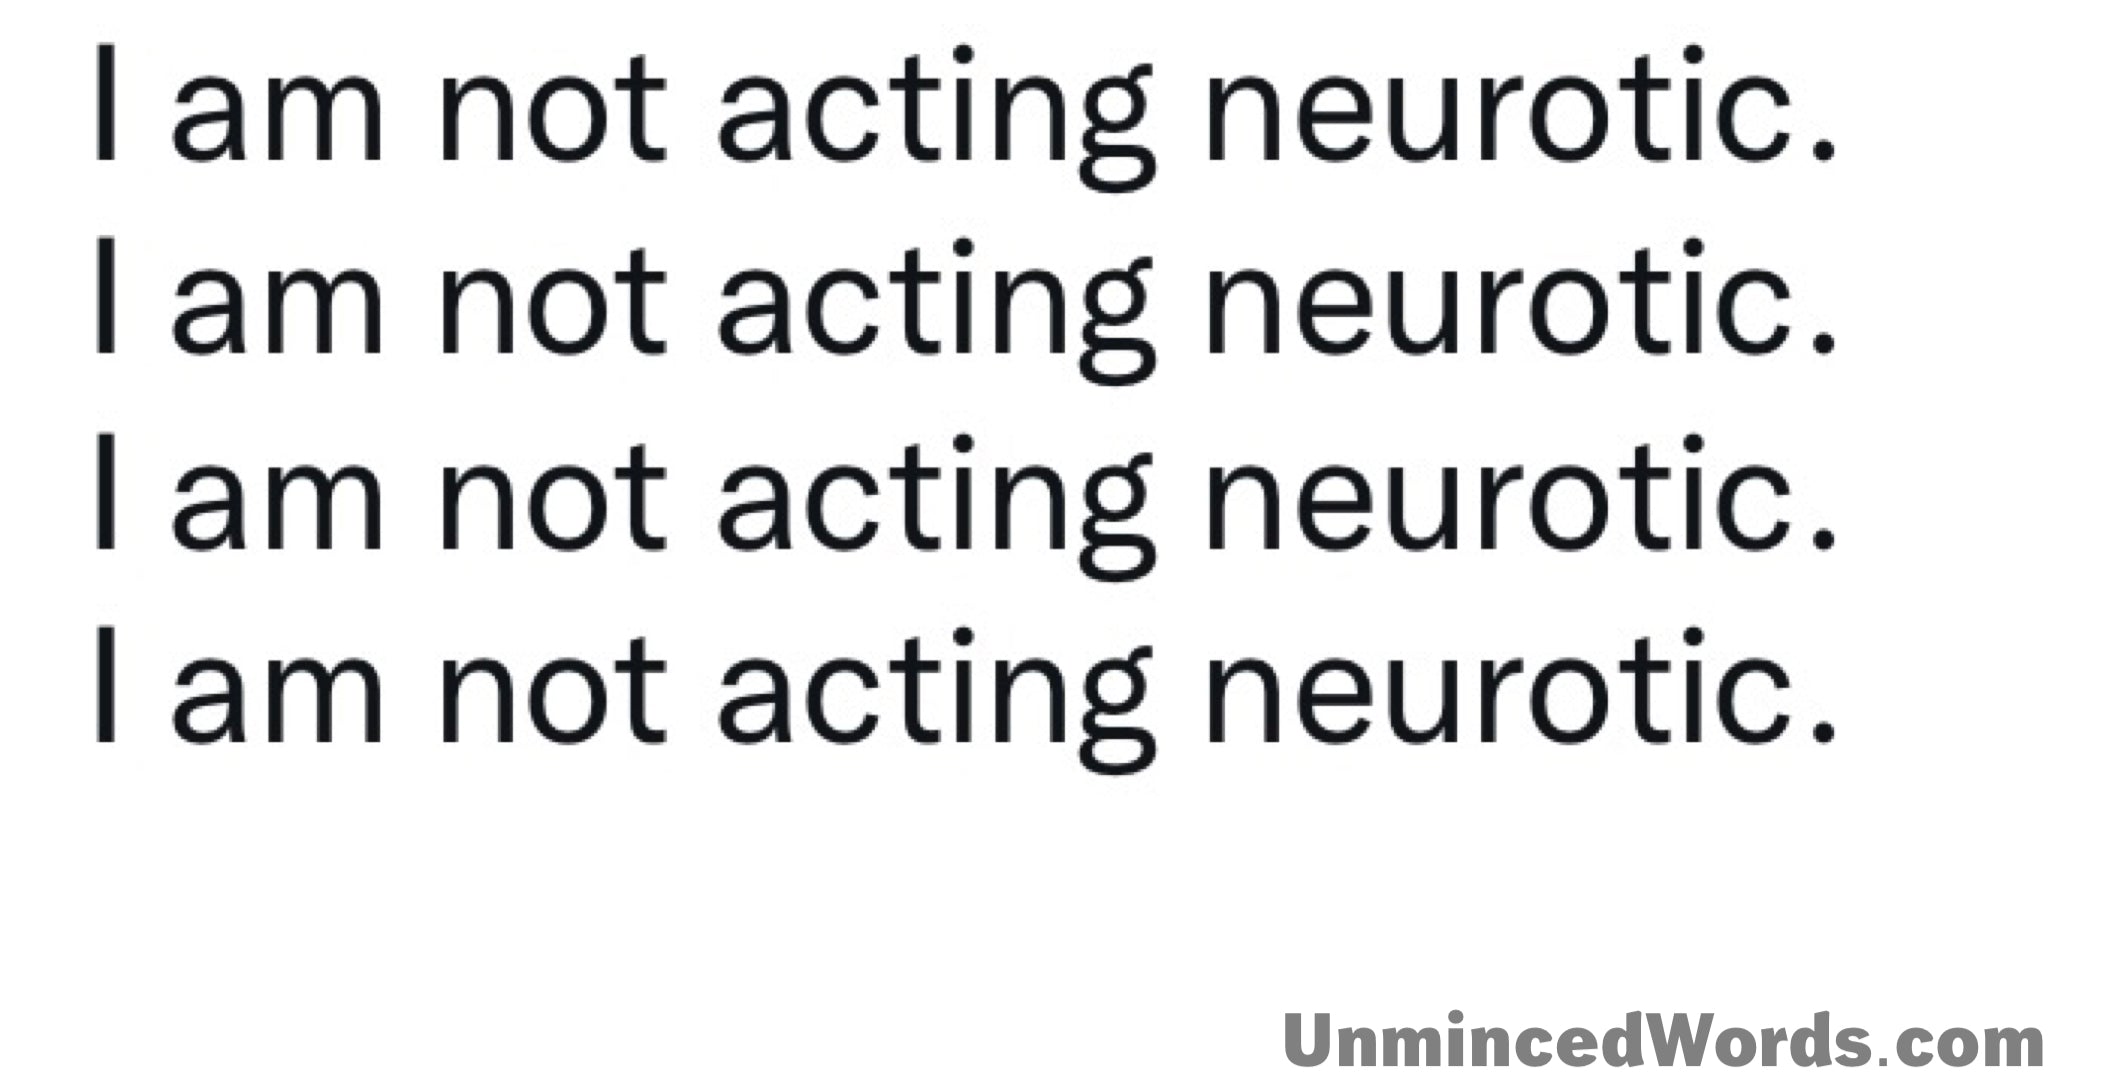 I am not acting neurotic meme sums it up